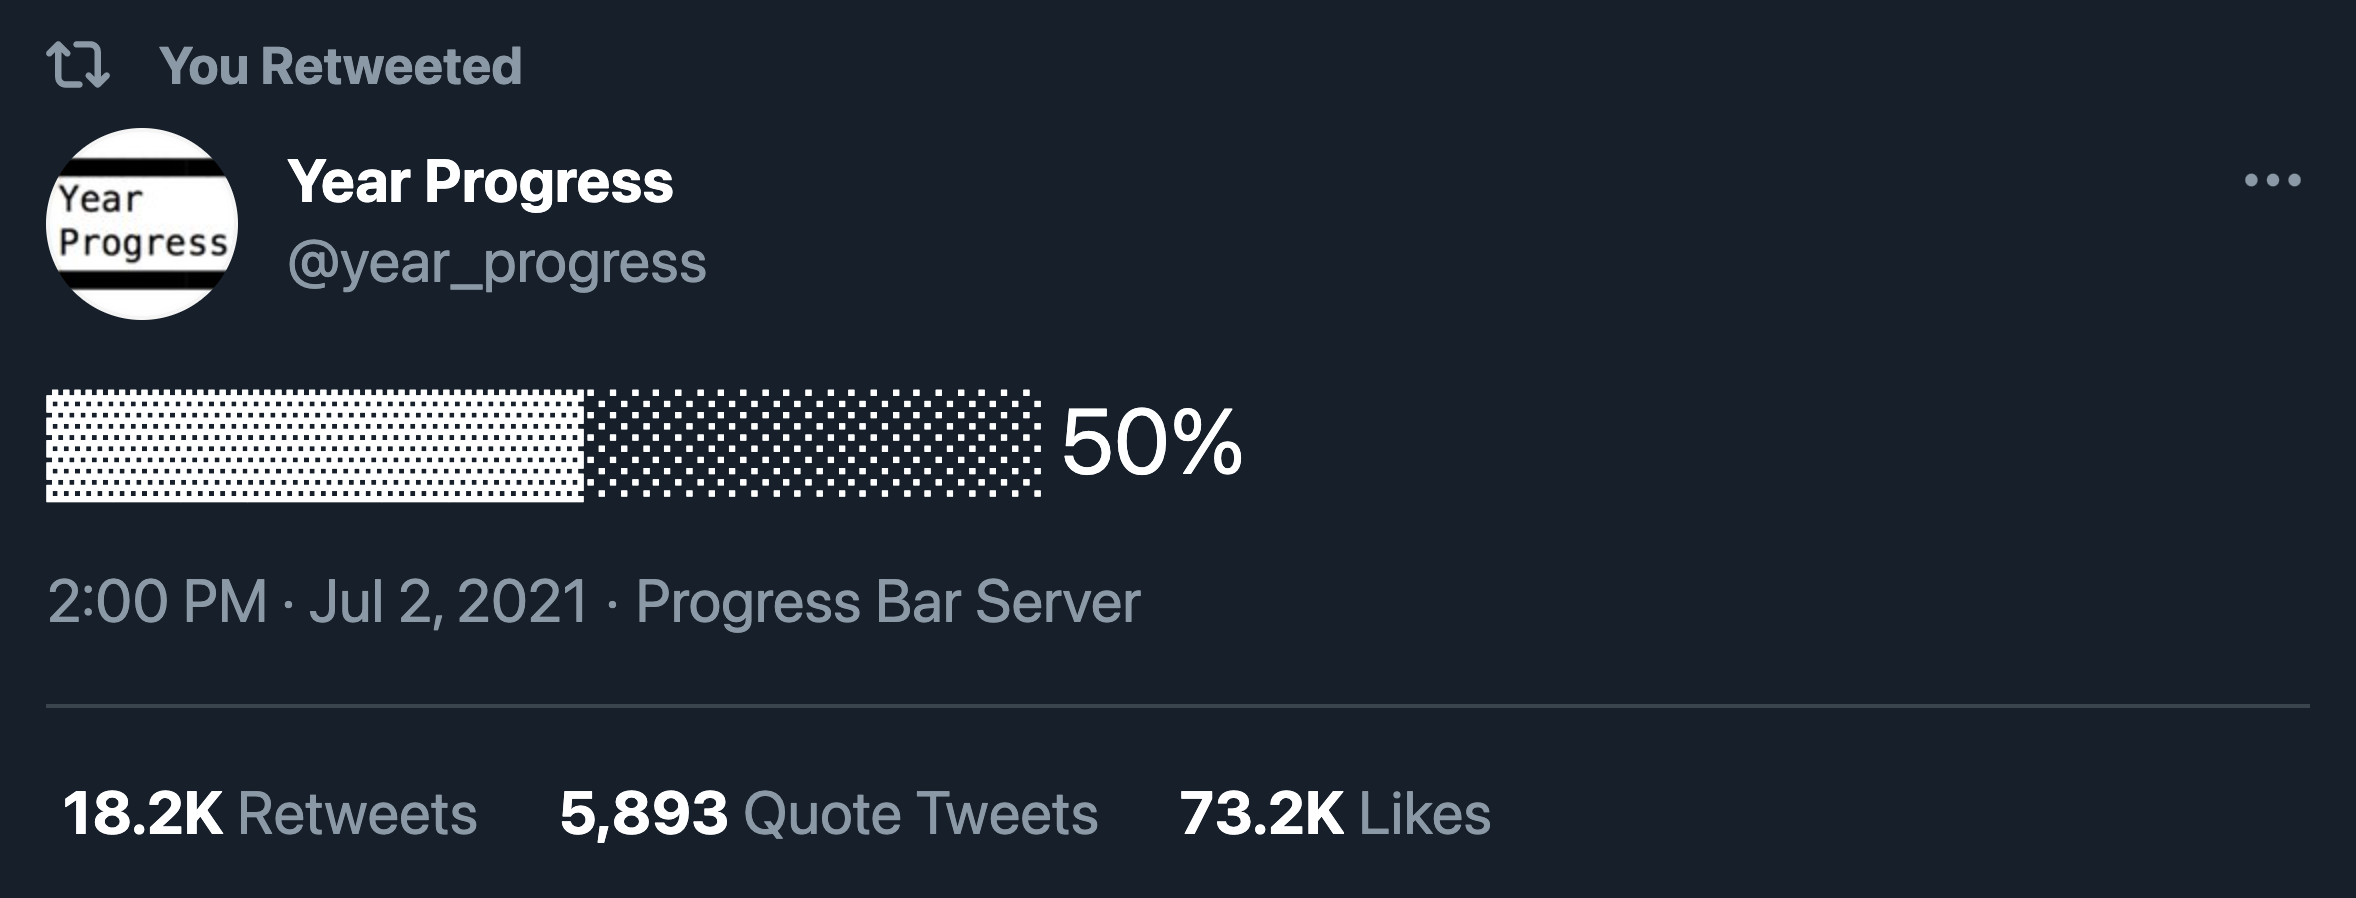 Tweet showing that the year is 50% done